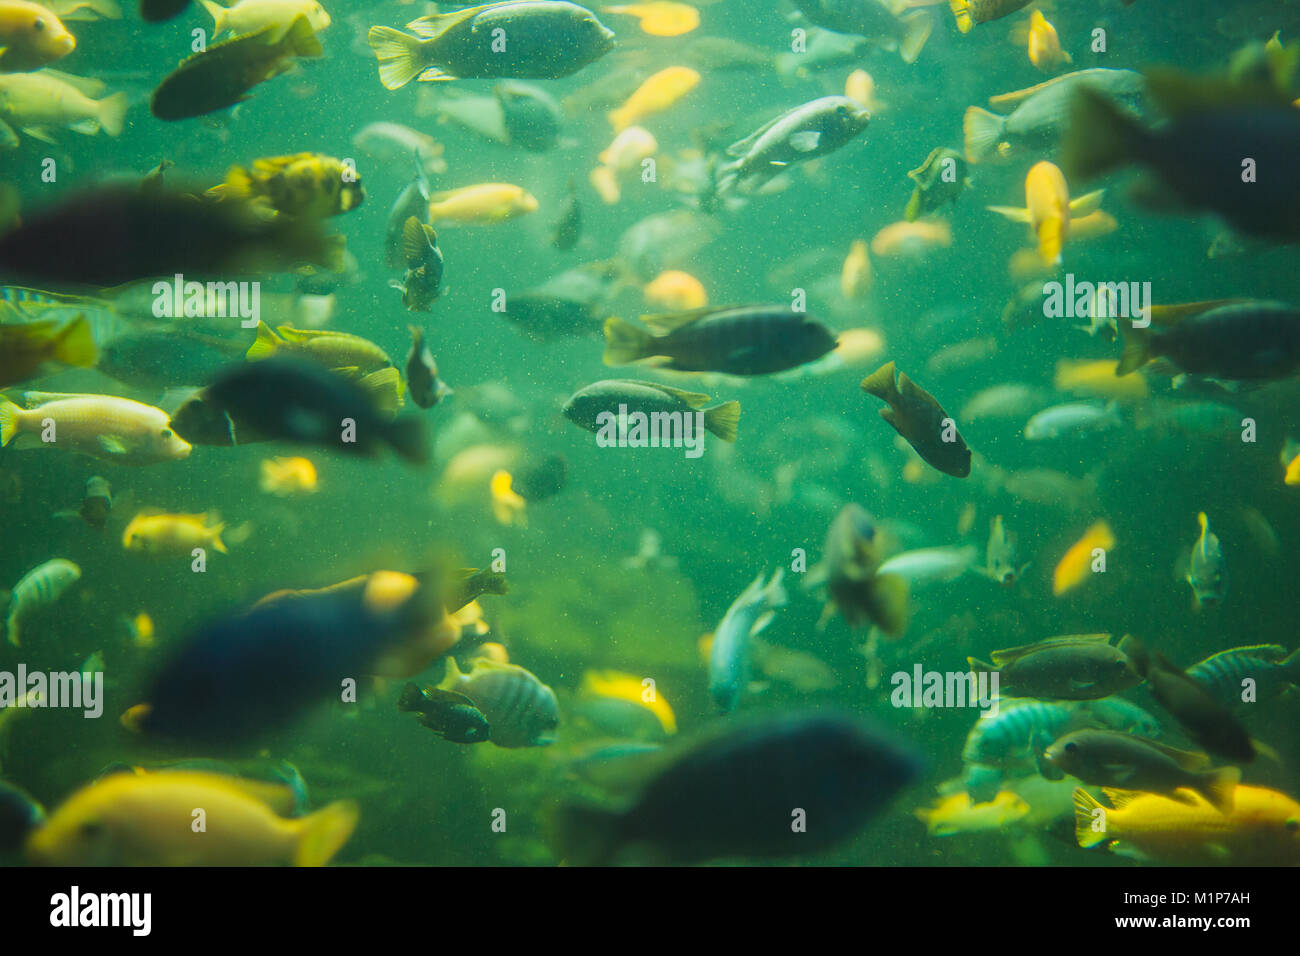 Close up view of a school of malawi cichlid in an aquarium Stock Photo